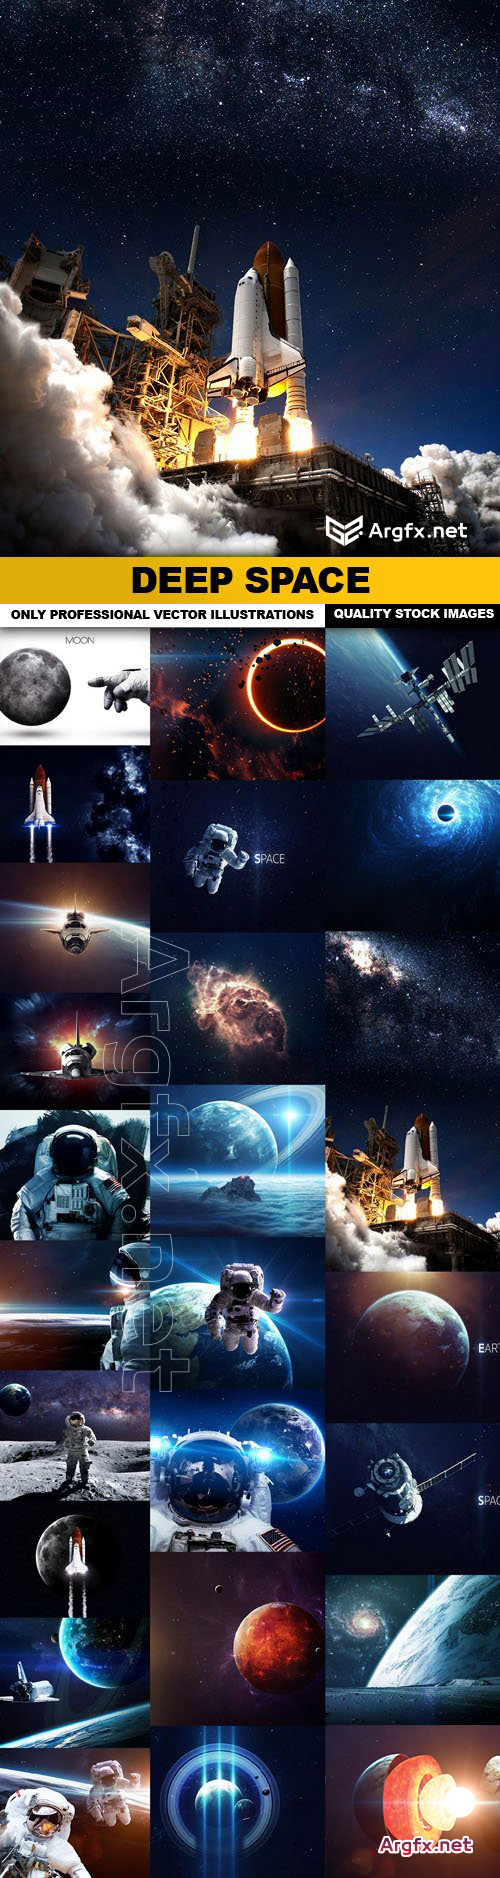  Deep Space - 25 HQ Images